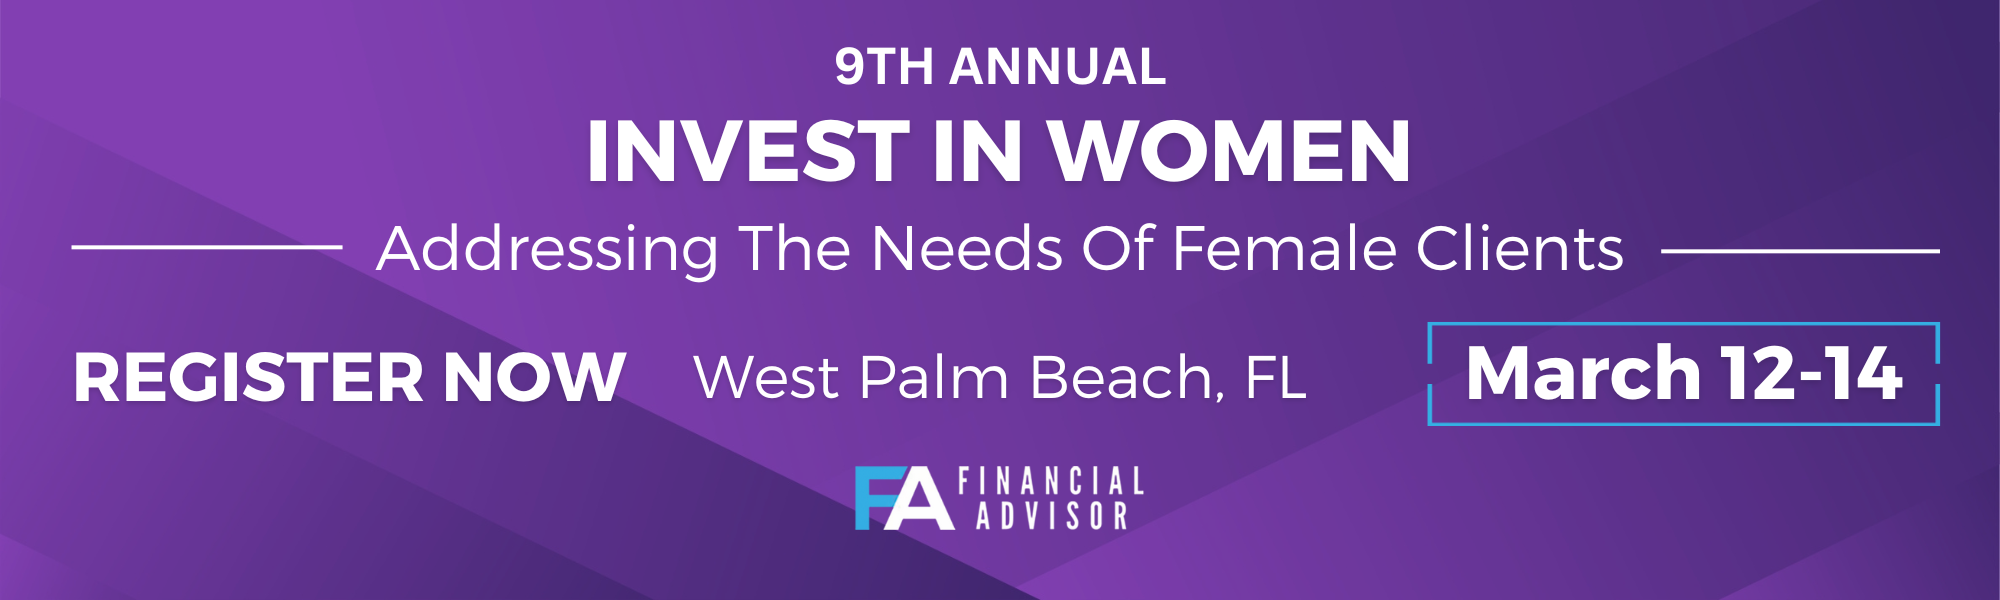 9th Annual Invest In Women